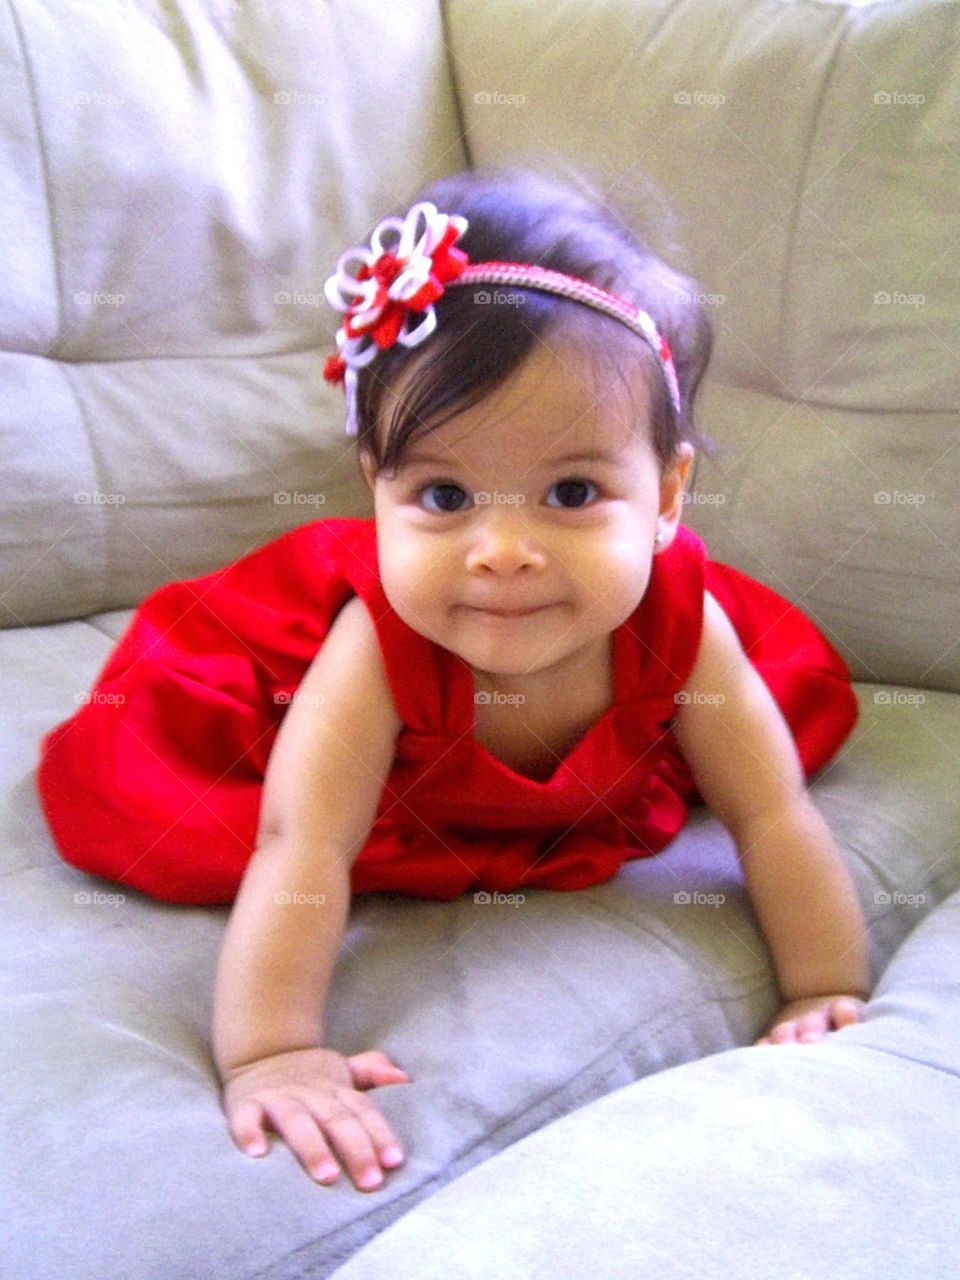 Baby girl in red dress